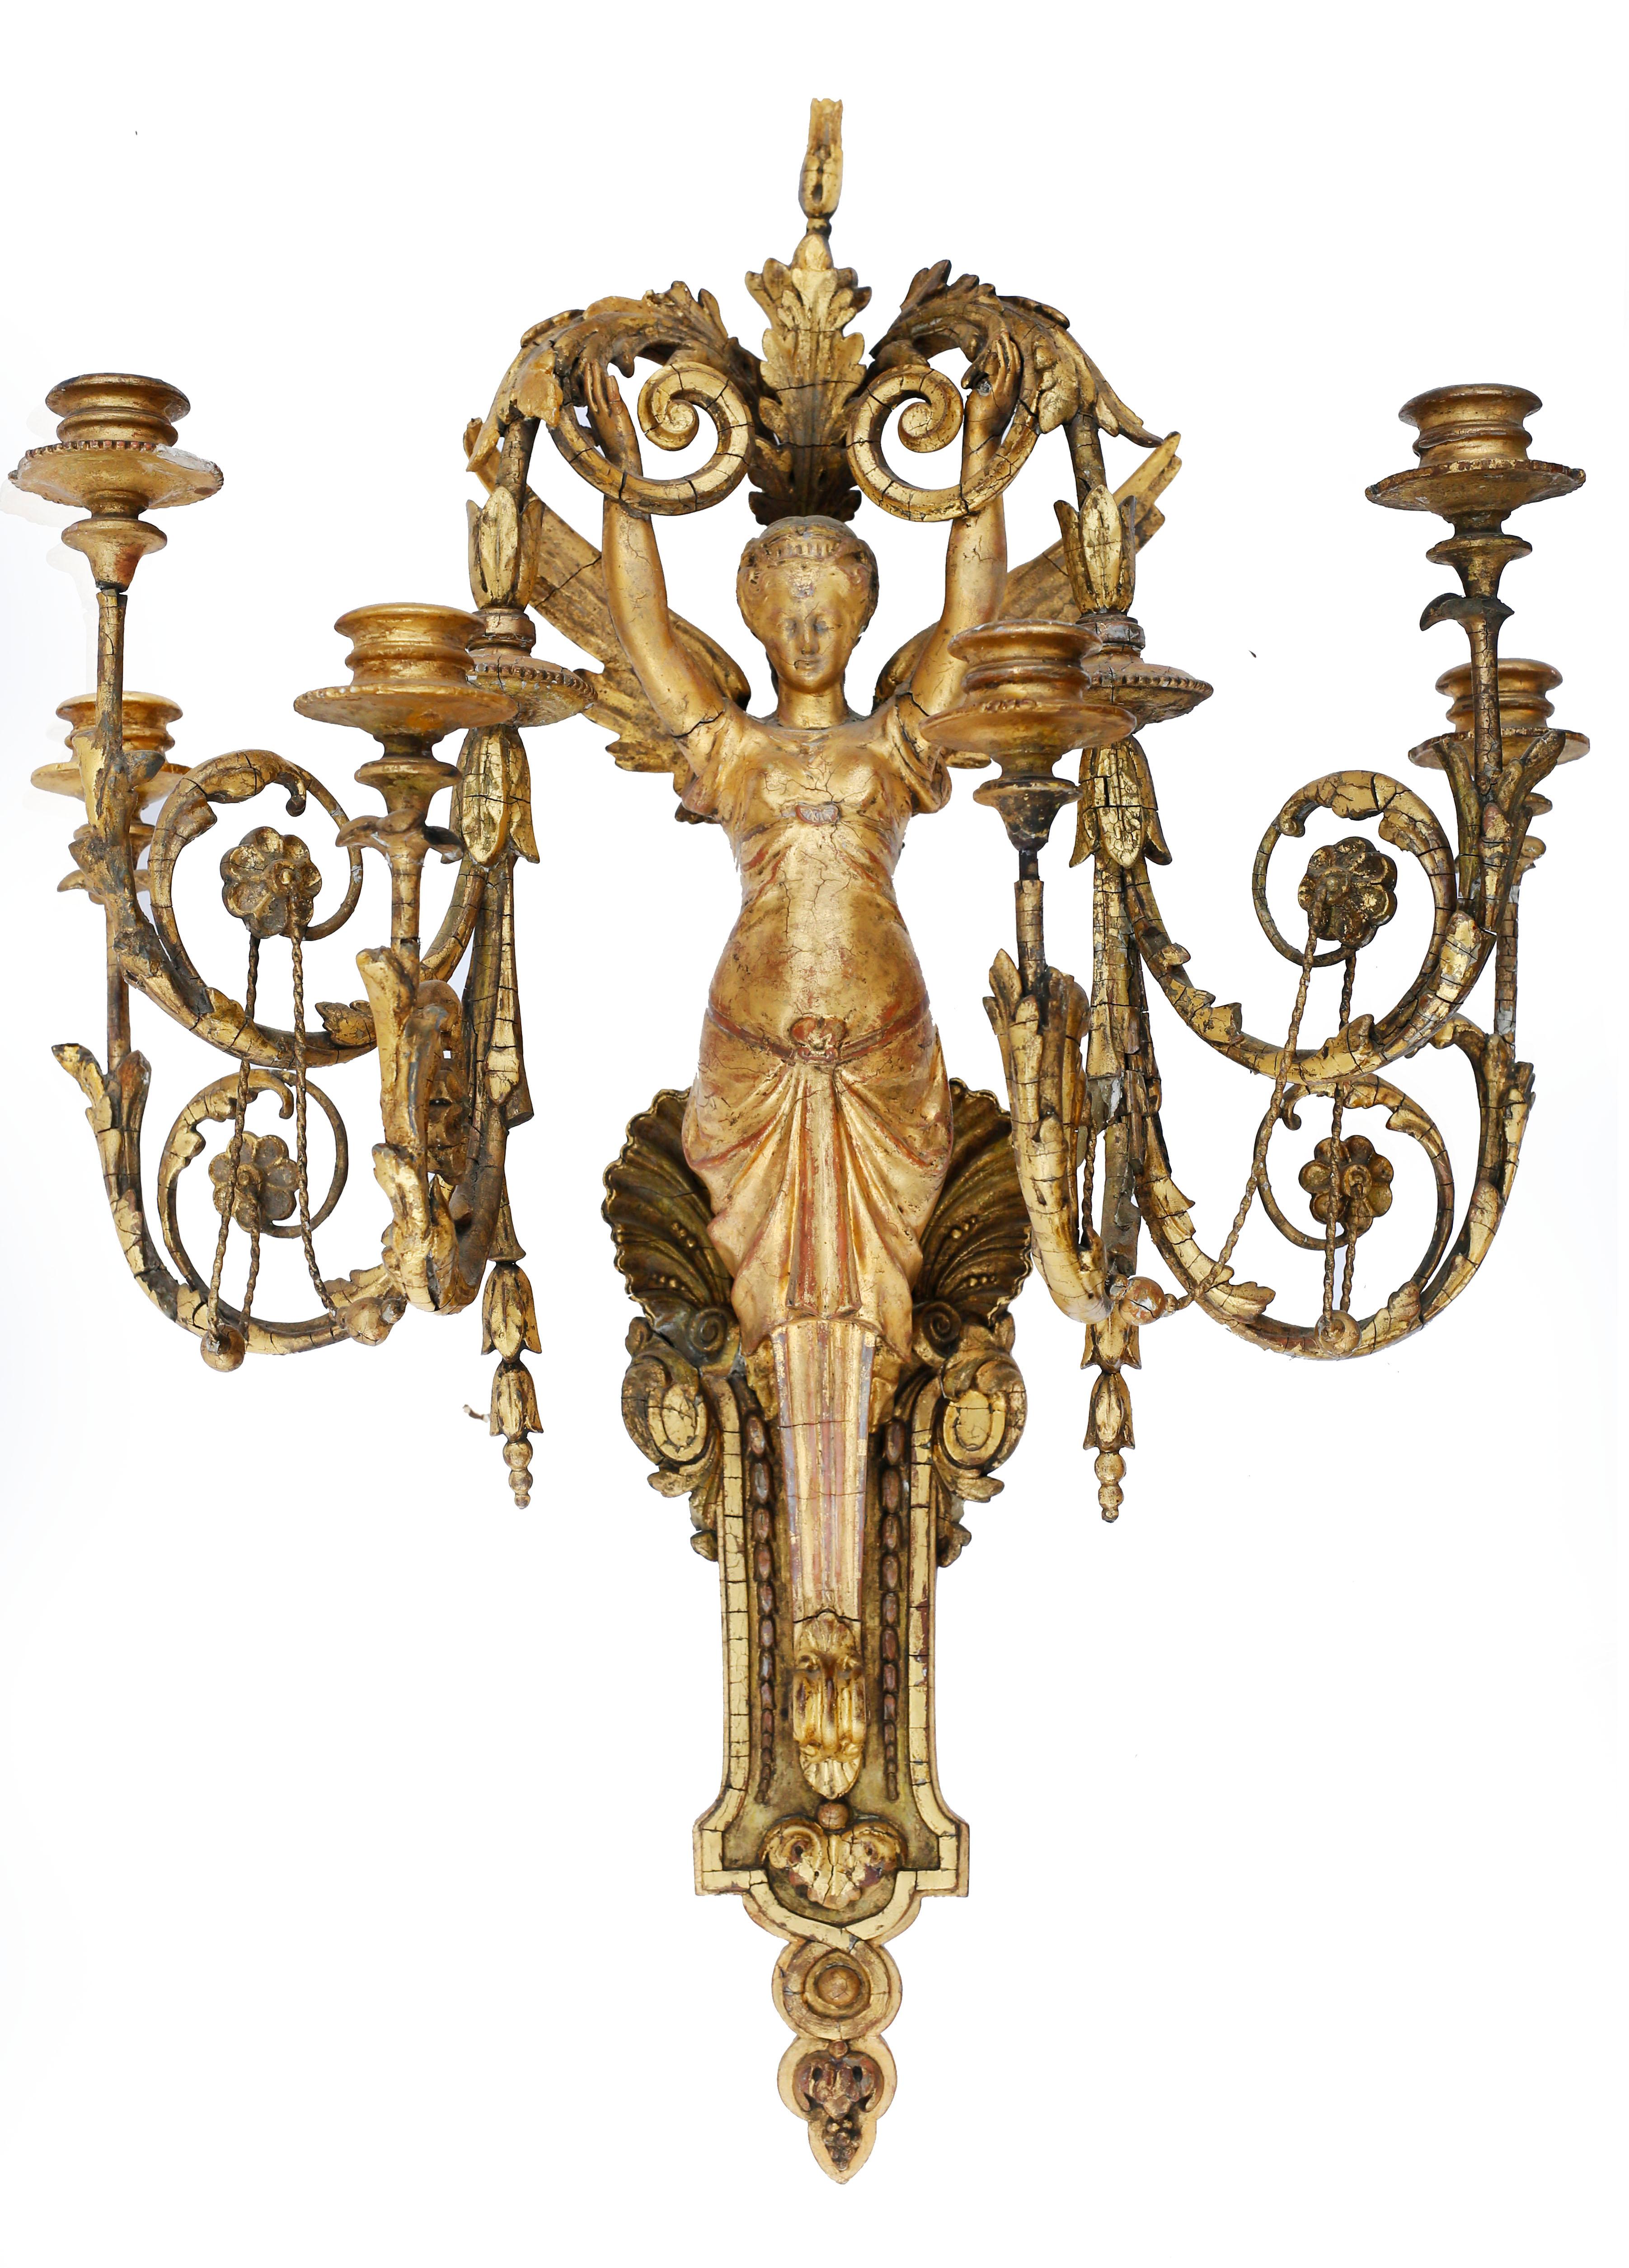 An exquisite pair of giltwood six-light wall sconces. The light is supported by the figure of a winged seraphim whose draped lower half melds into a molded bracket and acanthus pendant. The upper half of the bracket is decorated with a large scallop